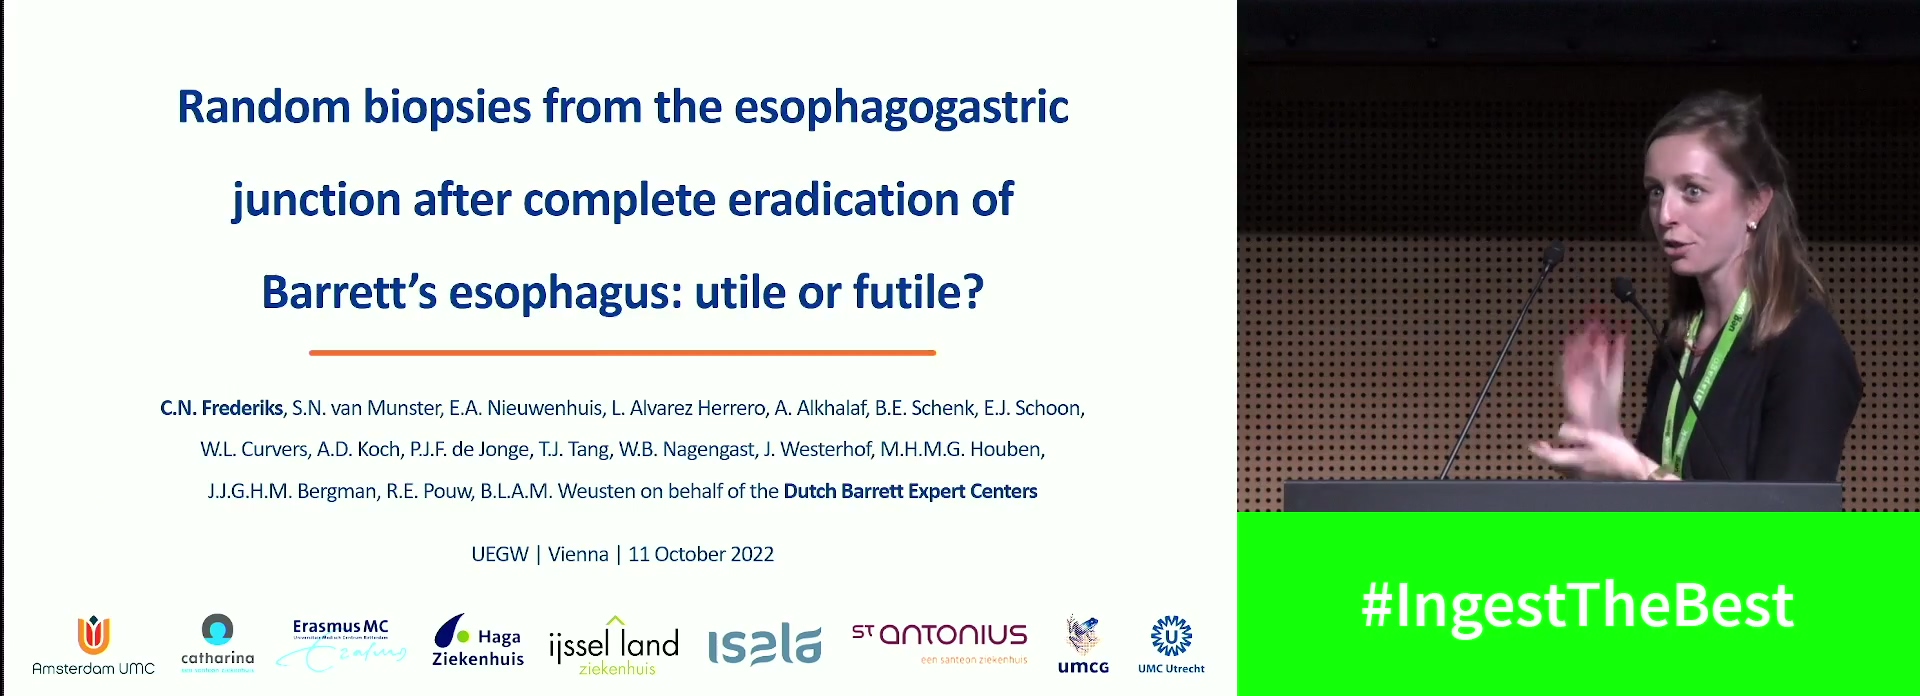 RANDOM BIOPSIES FROM THE GASTRO-ESOPHAGEAL JUNCTION AFTER COMPLETE ERADICATION OF BARRETT’S ESOPHAGUS: UTILE OR FUTILE?